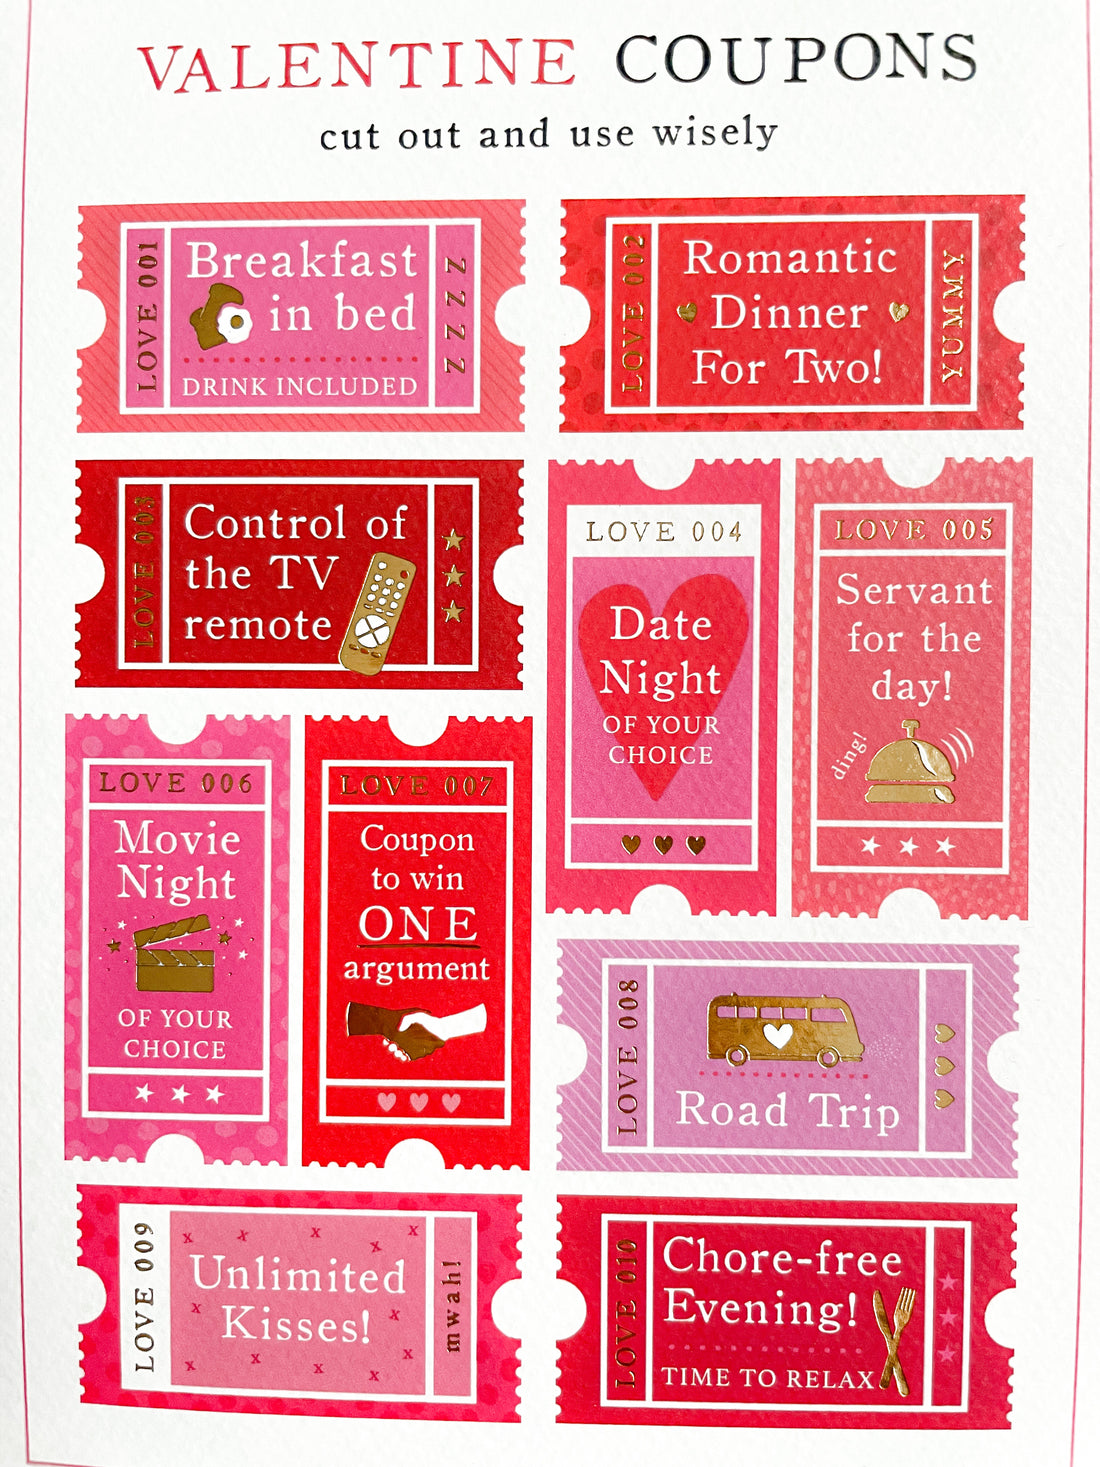 Valentine's Day Coupon gift card for her